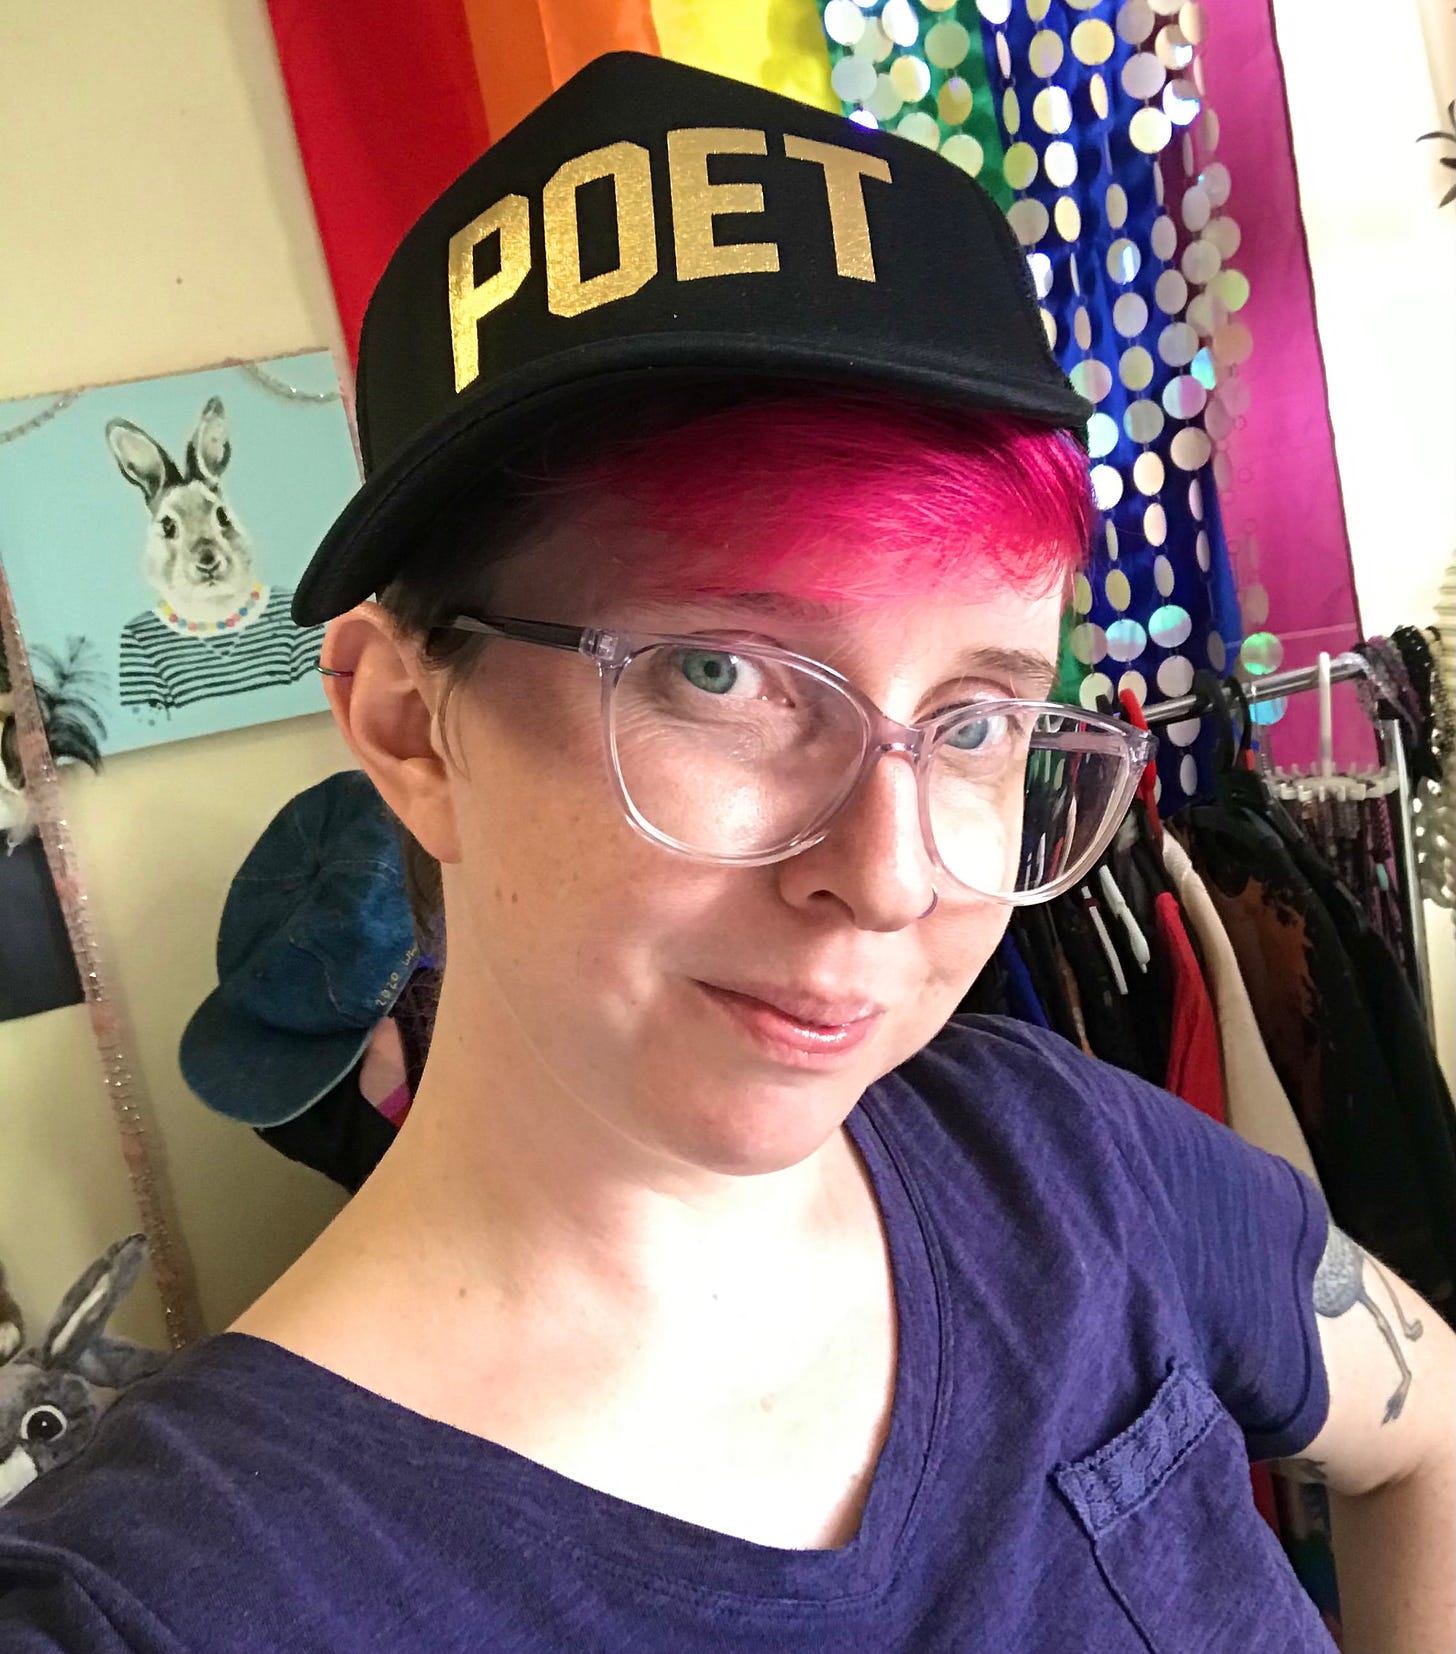 Rae White is in a room. They are wearing a cap with "poet" in gold on it. They have pink hair, large glasses and are wearing a purple shirt. in the room is a drawing of a rabbit.